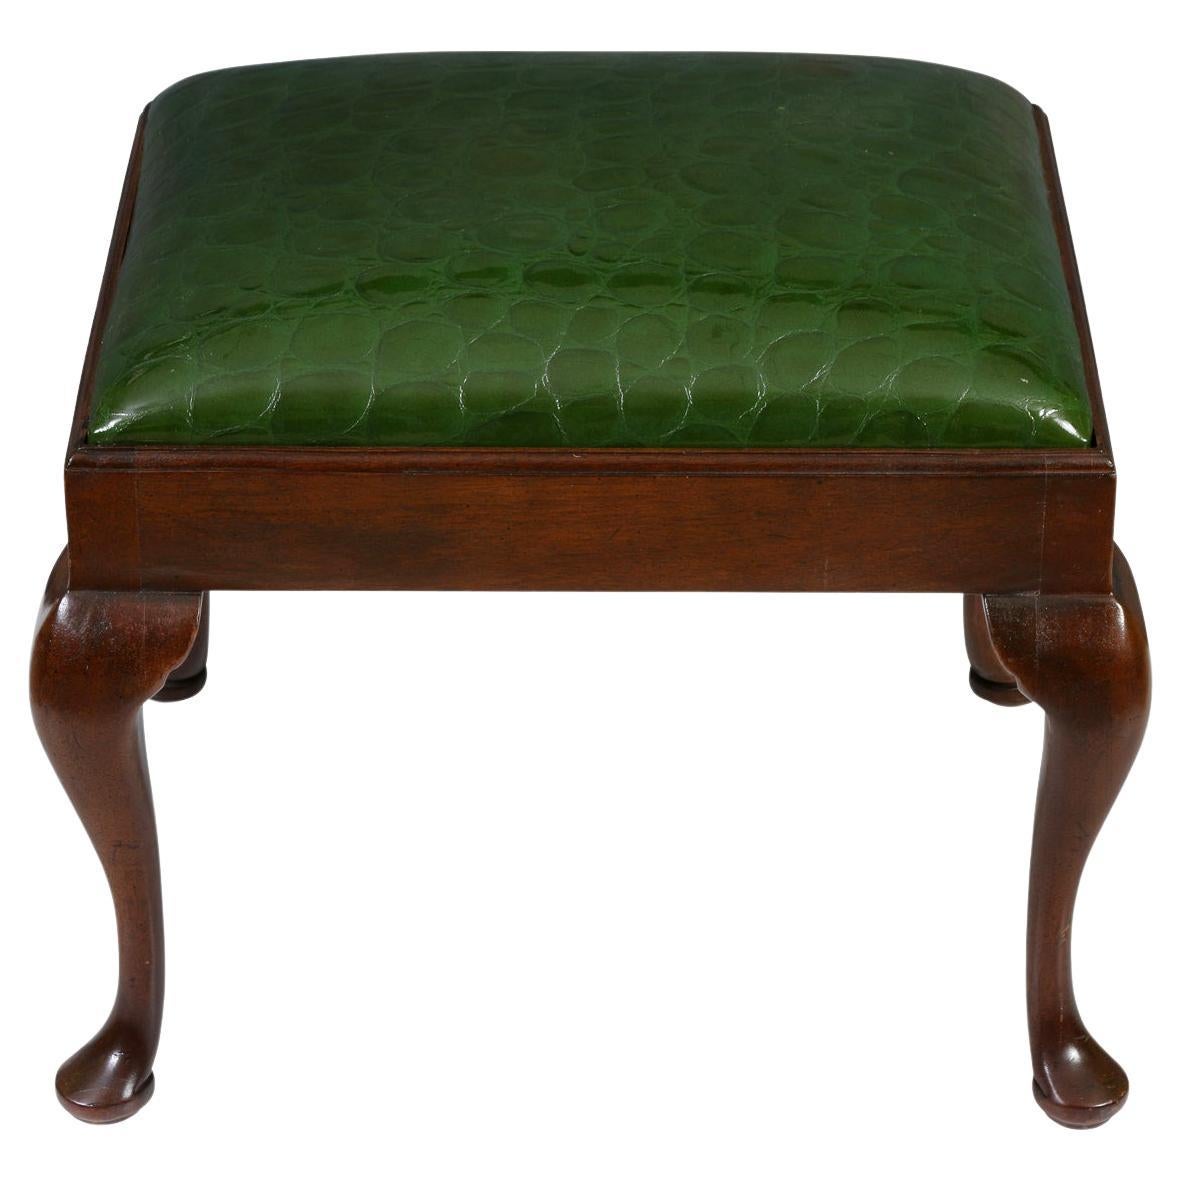 Old meets new in this great looking pair of Queen Anne style benches. Each has a has rectangular top, supported by graceful cabriole legs.  They have been reupholstered in a  vibrant faux crocodile green patent leather, giving them a whole new look!